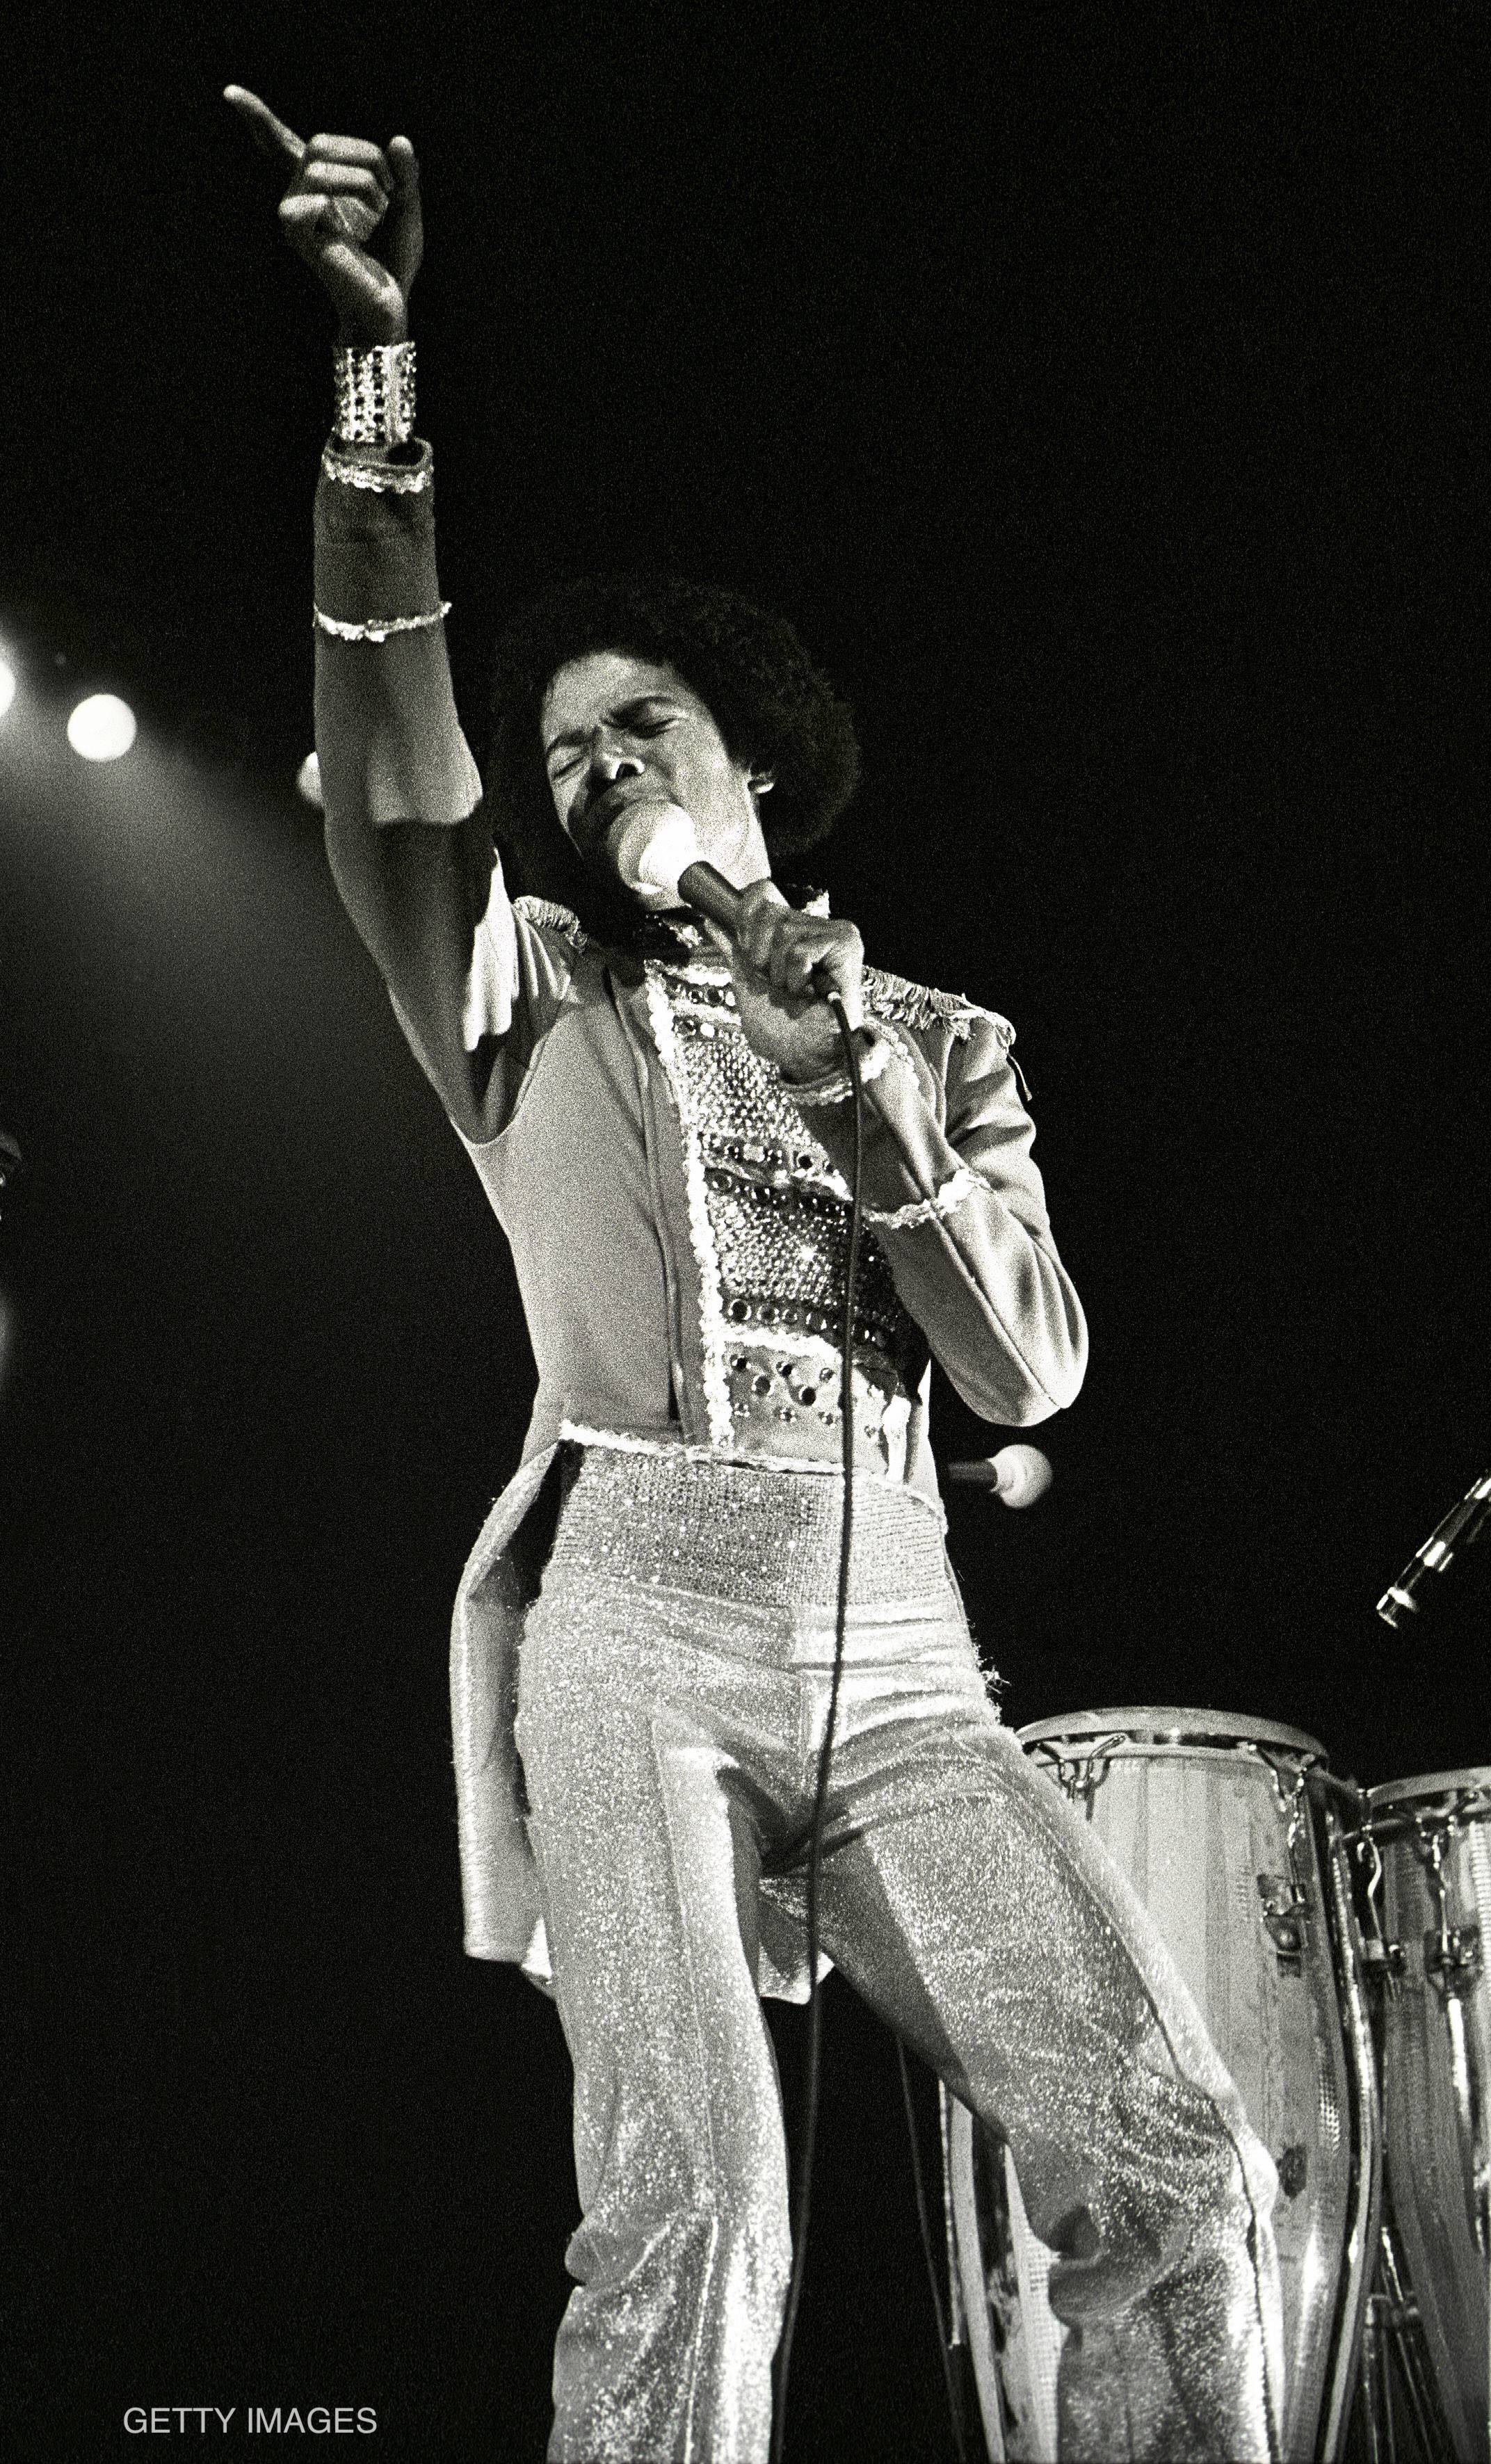 Michael Jackson performs on stage with The Jacksons on the Destiny World Tour in Amsterdam, The Netherlands in February 1979.